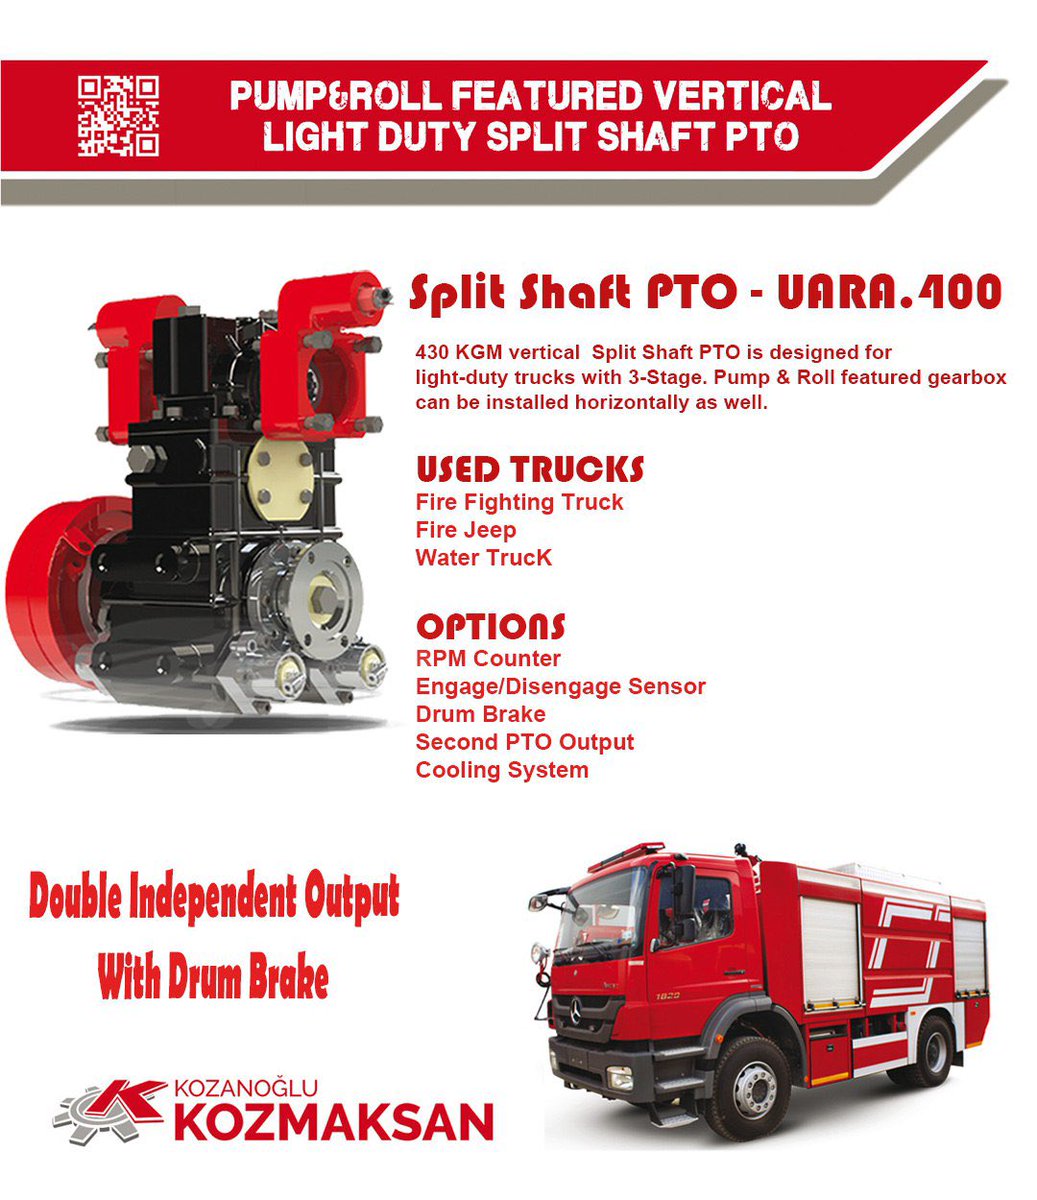 ✔️Fight with fire more remotely, effectively and safely with Kozmaksan's 430 KGM Vertical Split Shaft PTO - UARA.400

Designed for Fire Fighting Trucks, Fire Jeep, Water Trucks.

kozmaksan.net/split-shaft-pt…

#powertakeoff #pto #vehicles   #truck #firetruck #commercialvehicle